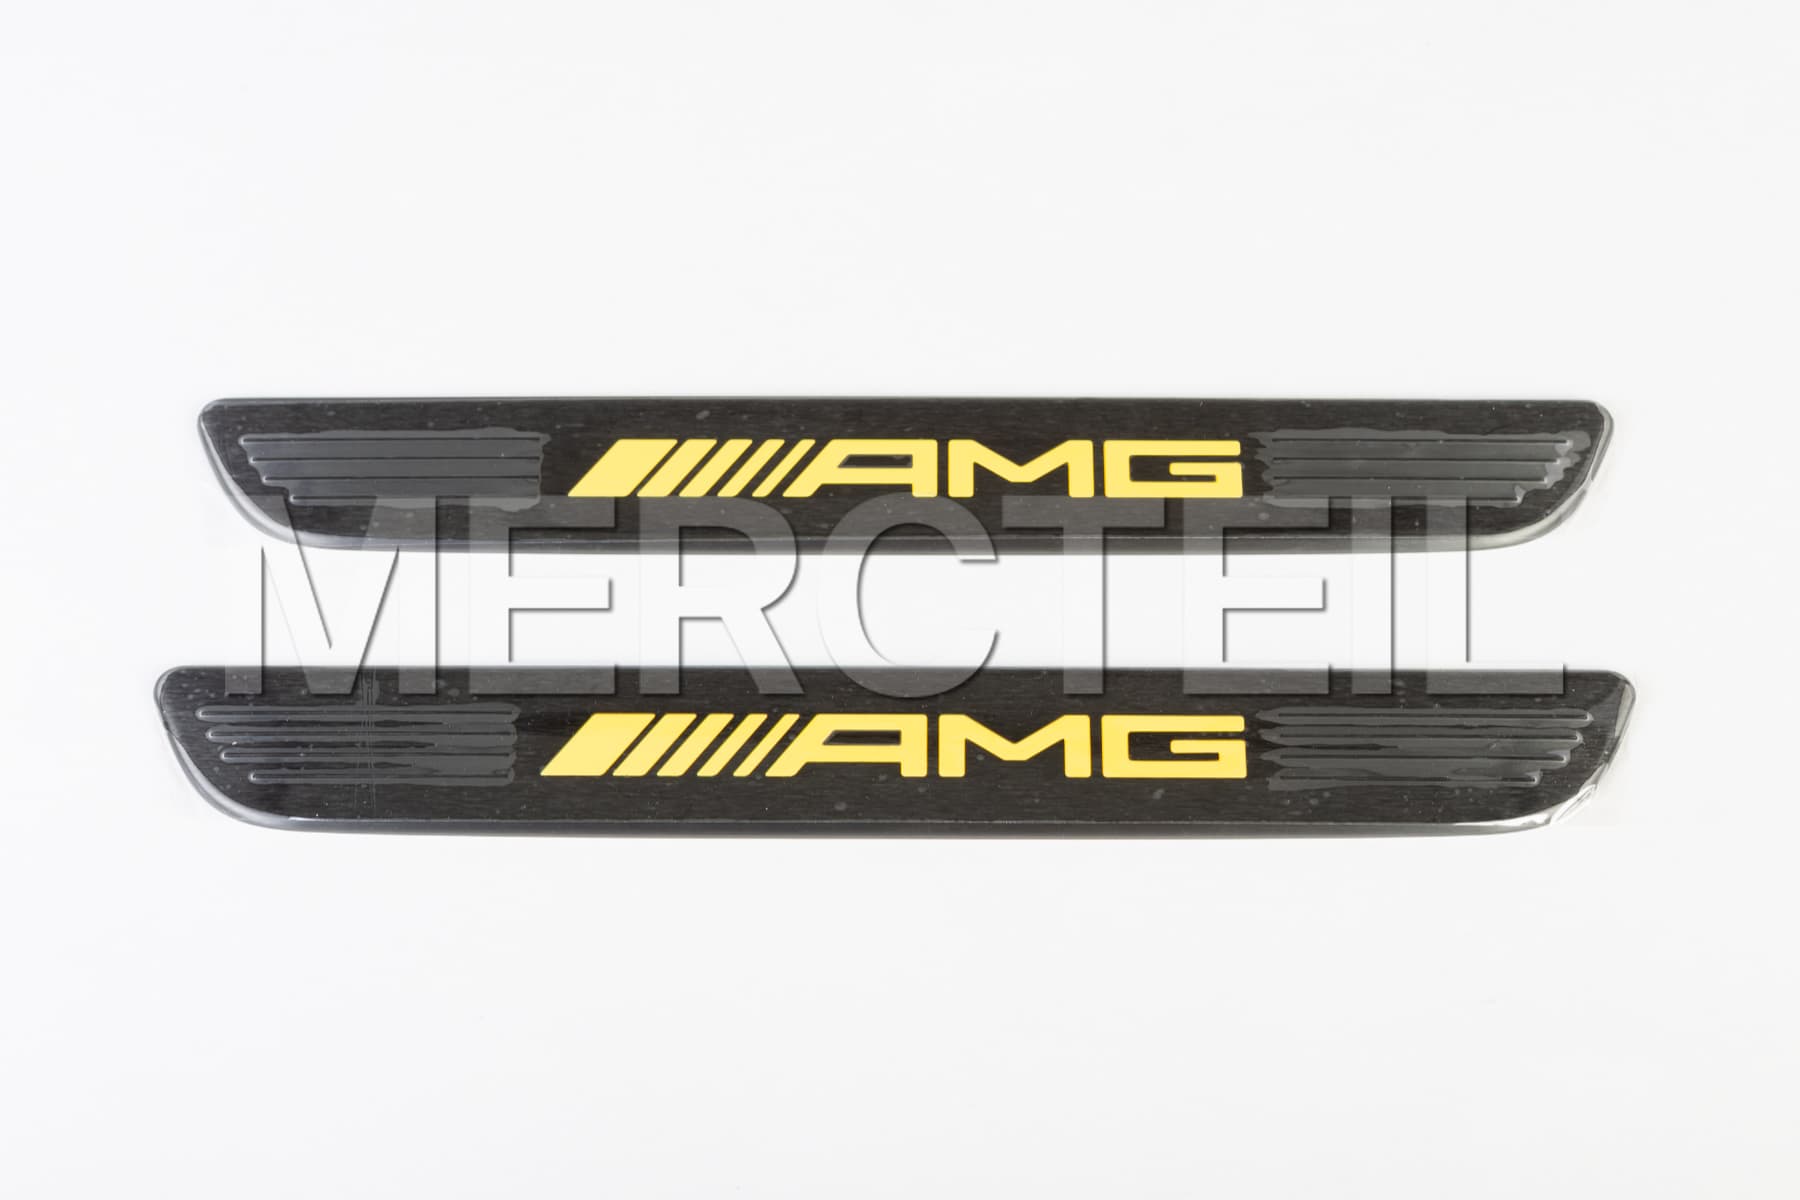 GLC Class Exchangeable AMG Covers for Illuminated Door Sills Genuine Mercedes AMG (part number: A2056862300)